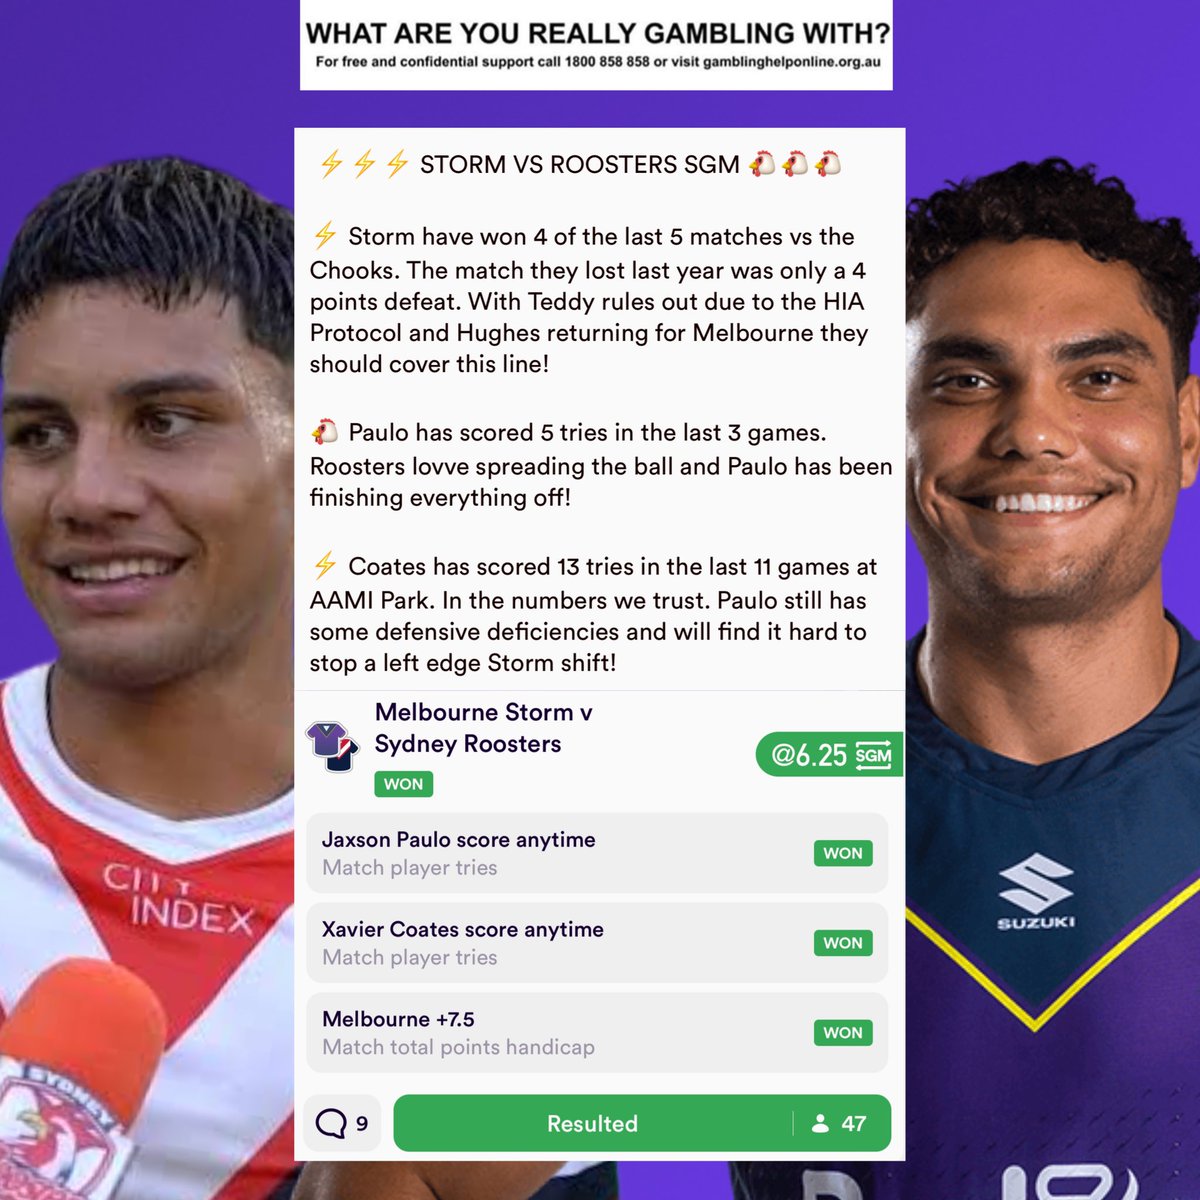 EASY AS IT GETS 💰

47 Happy Copiers ✅✅✅

Pockets full ahead of the long weekend 💪

NRL ROUND 6 TIPS: tinyurl.com/329yce2t 👈

BACK CAST, WIN FAST 💰

#Winner #NRLTips #NRLStormRoosters